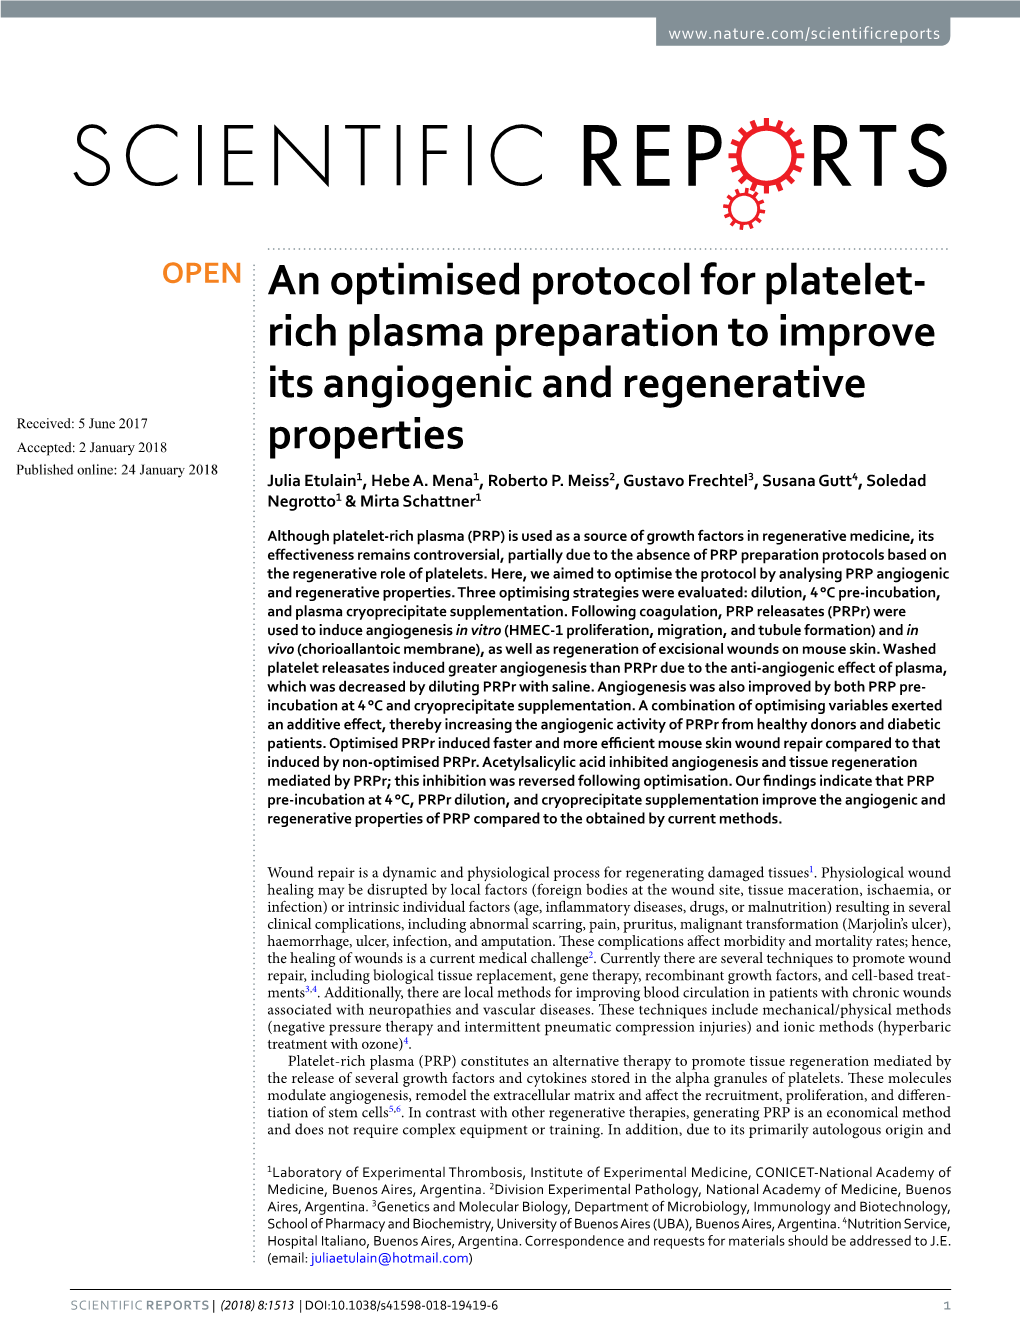 An Optimised Protocol for Platelet- Rich Plasma Preparation to Improve Its